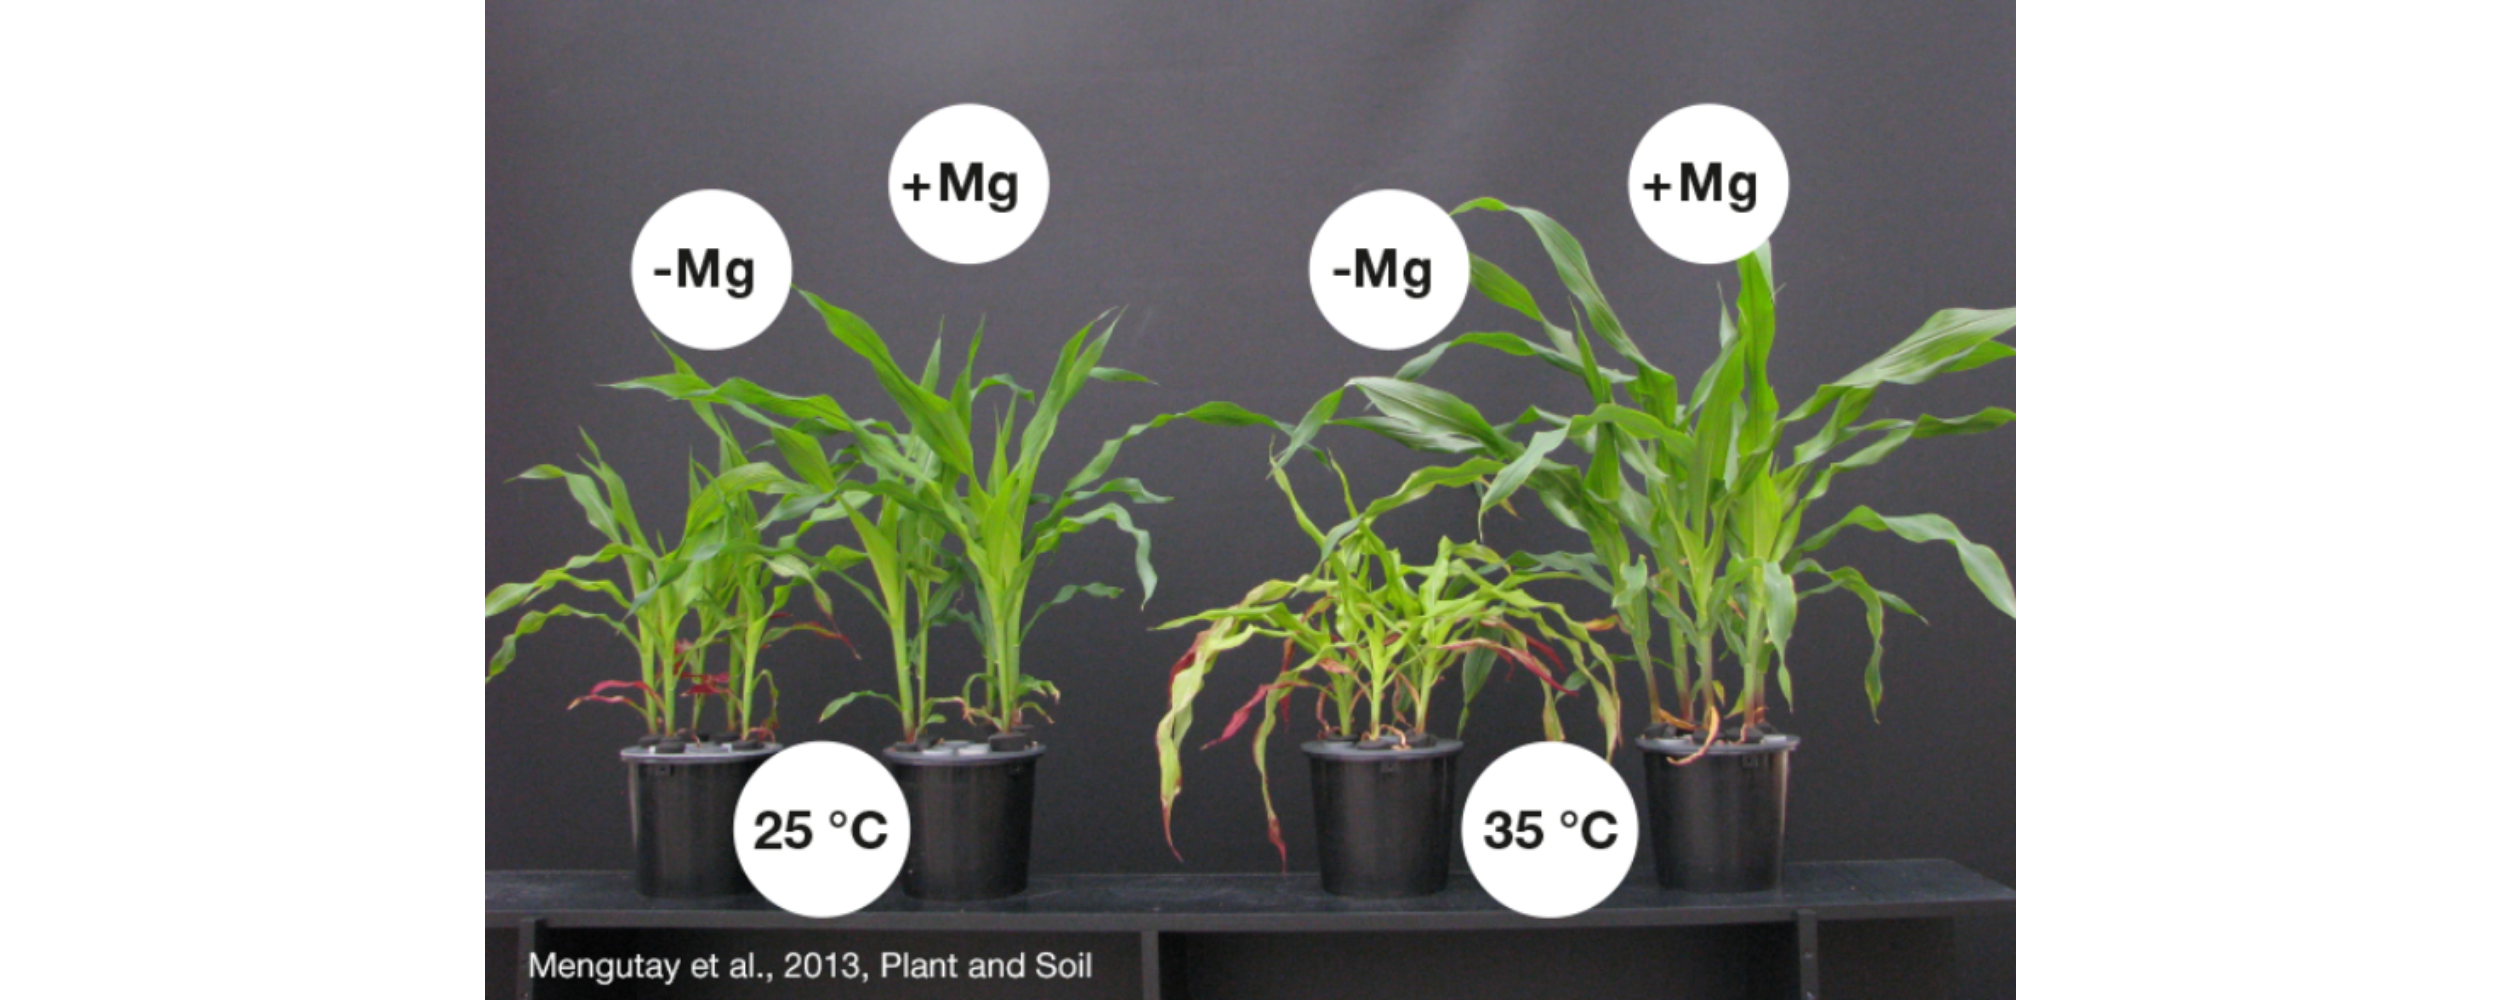 The corn stem deficient in Magnesium (-Mg) is retarded in growth compared to that with a good Magnesium supply (+Mg). At high temperatures of 35°C the effect is exacerbated.